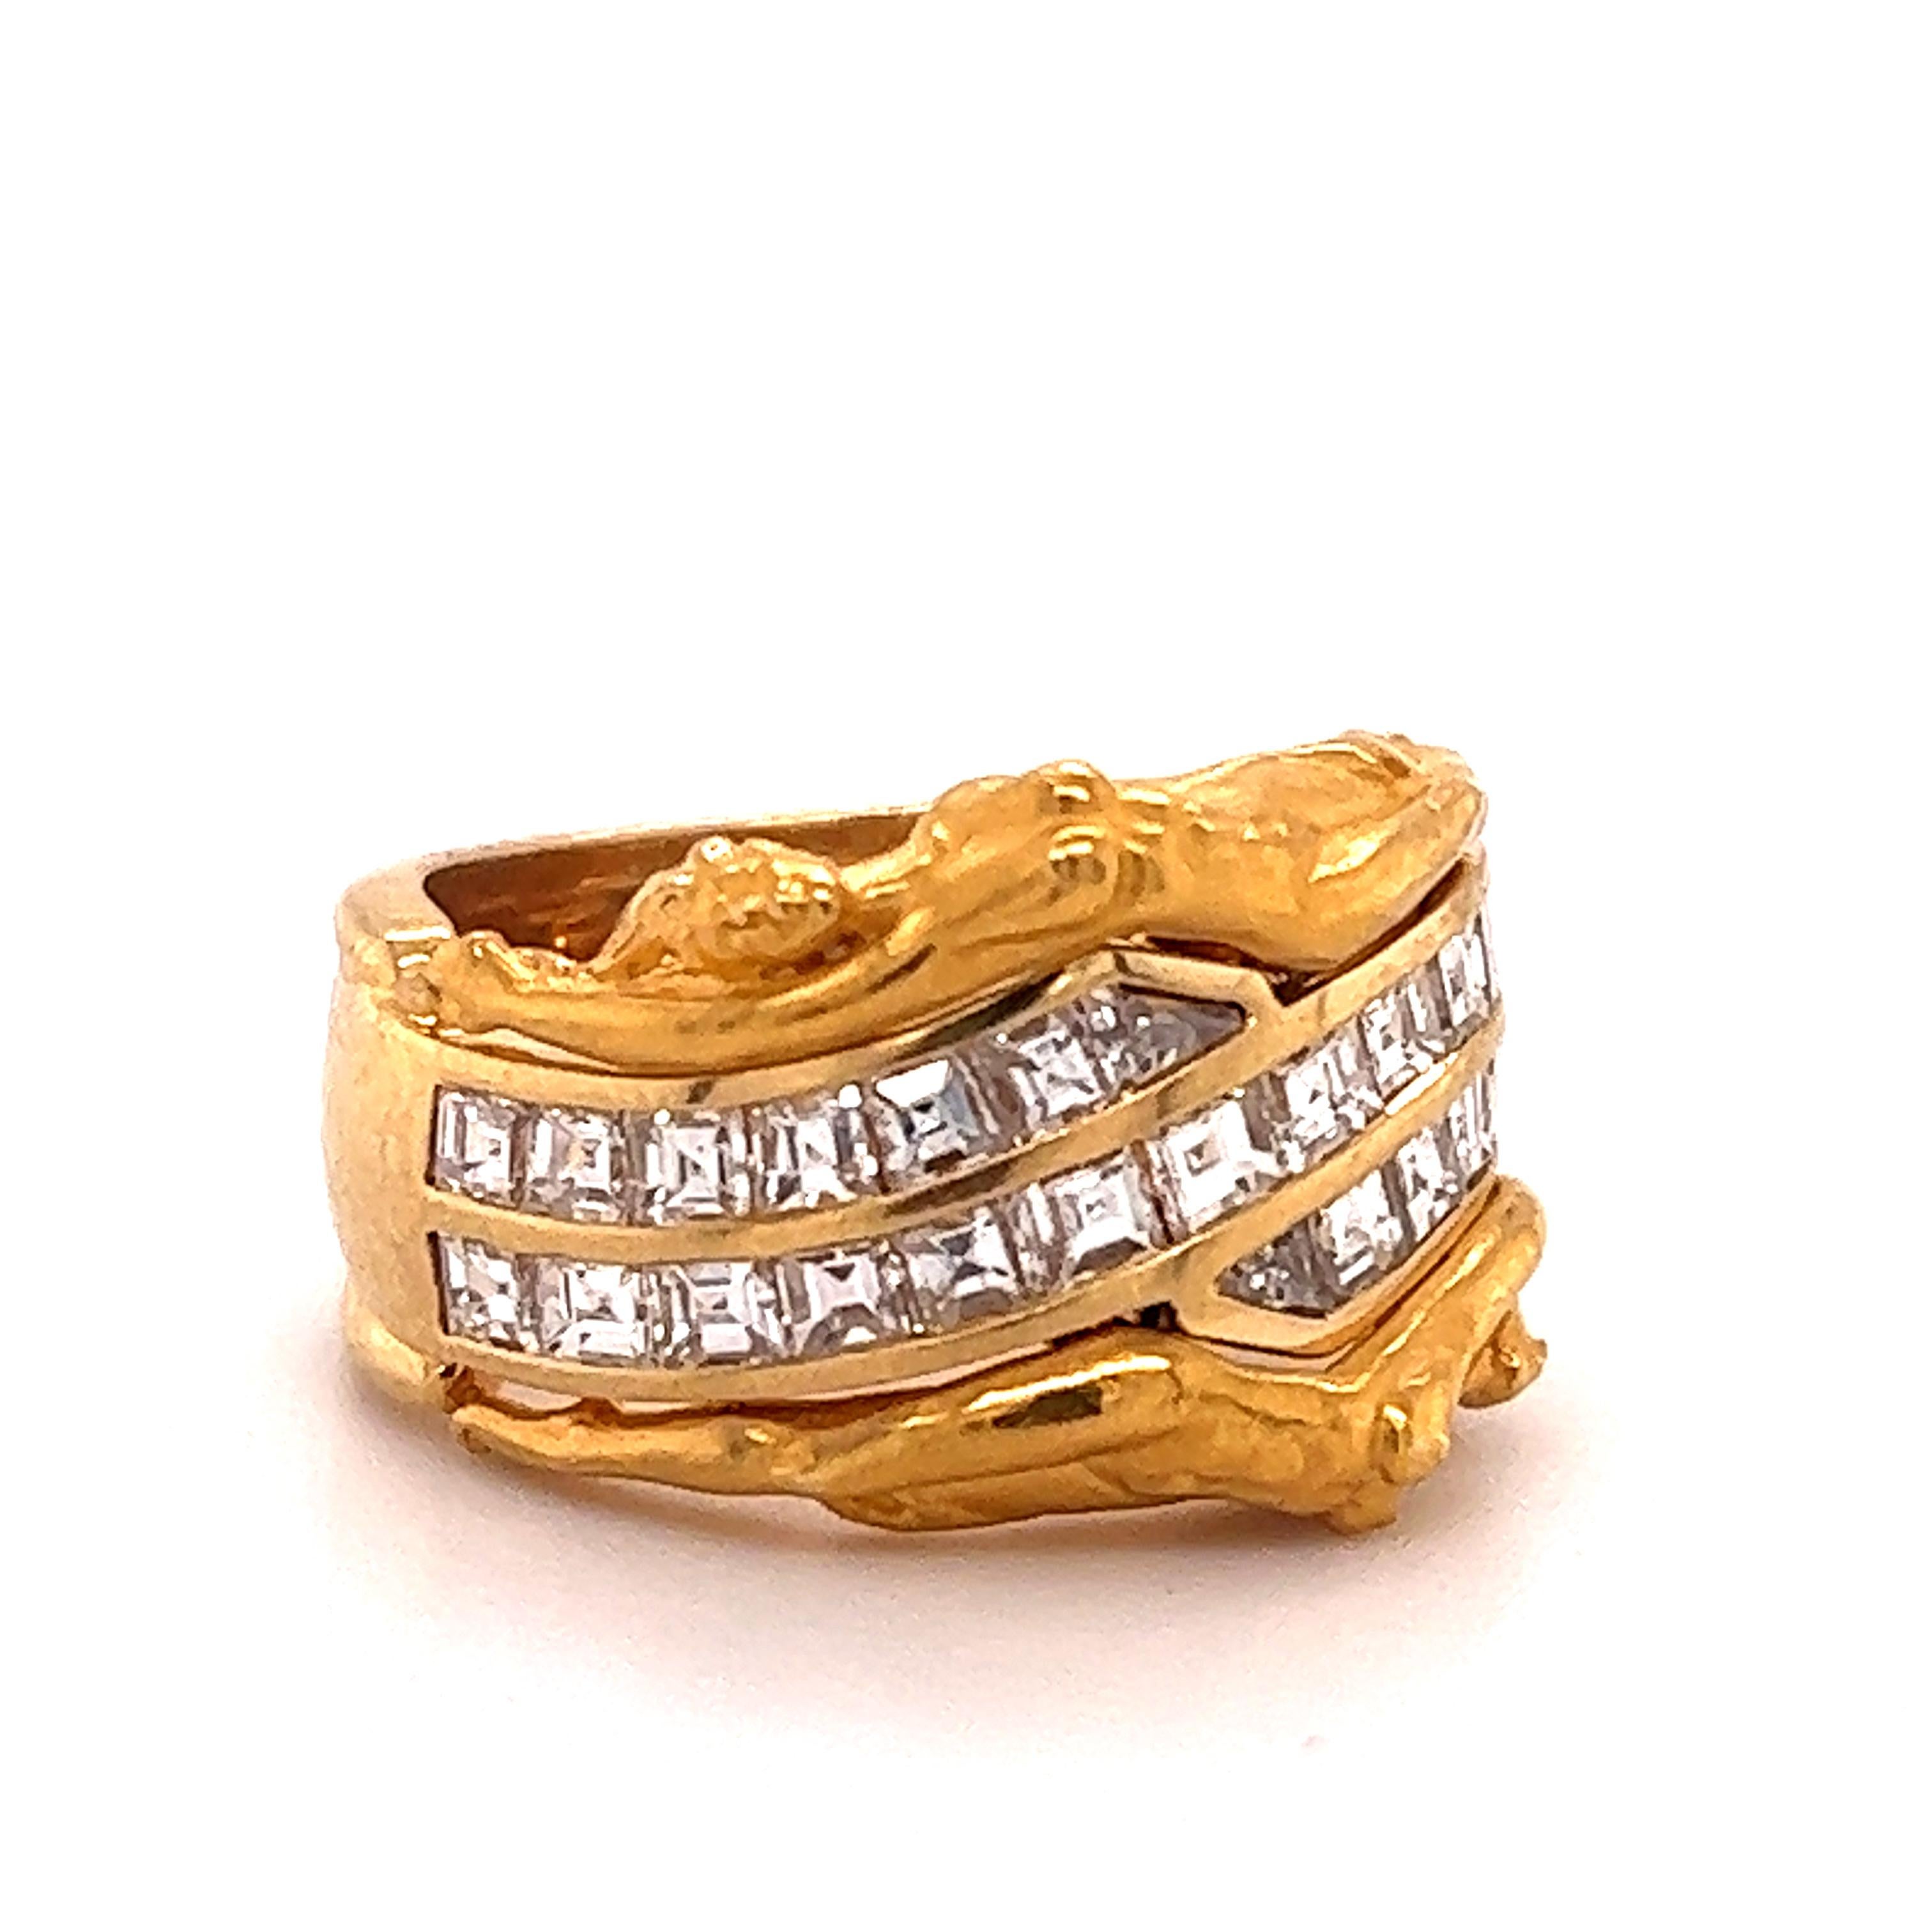         Gorgeous design crafted by famed designer Carrera y Carrera. The ring is crafted in 18k yellow gold and highlights an erotic theme as two naked ladies lay across the top and bottom of the design.
         The ring is a wide band design as it